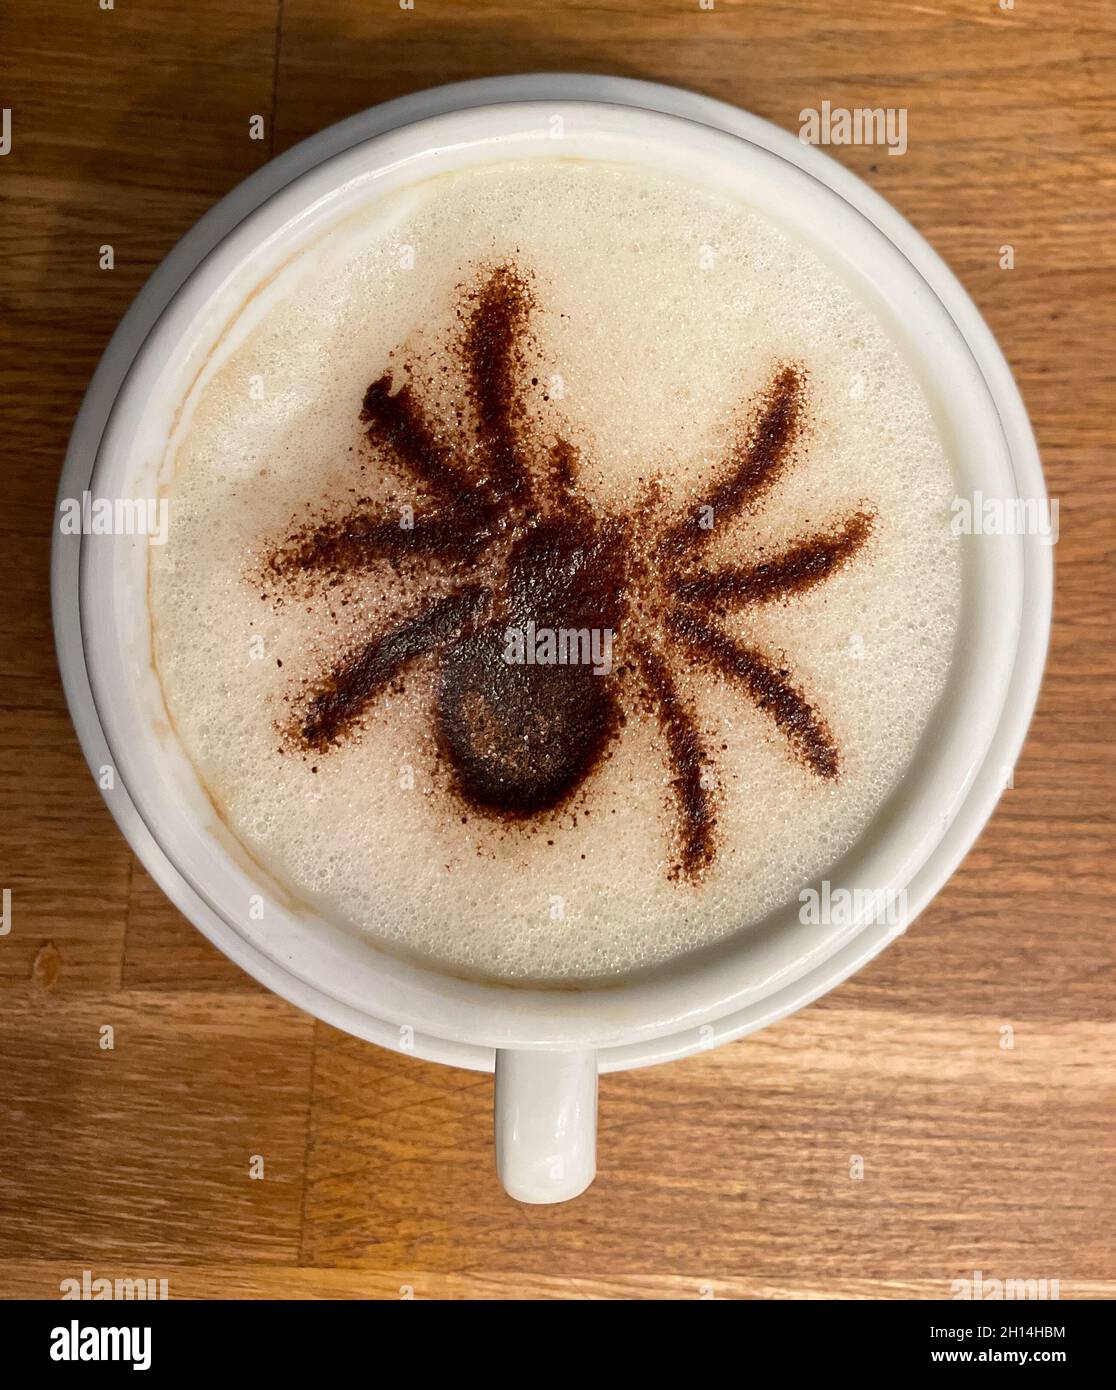 A mug of frothy cappuccino coffee has a spider image in the froth made of chocolate sprinkles.Viewed from above.Halloween symbol of All Hallows Eve Stock Photo